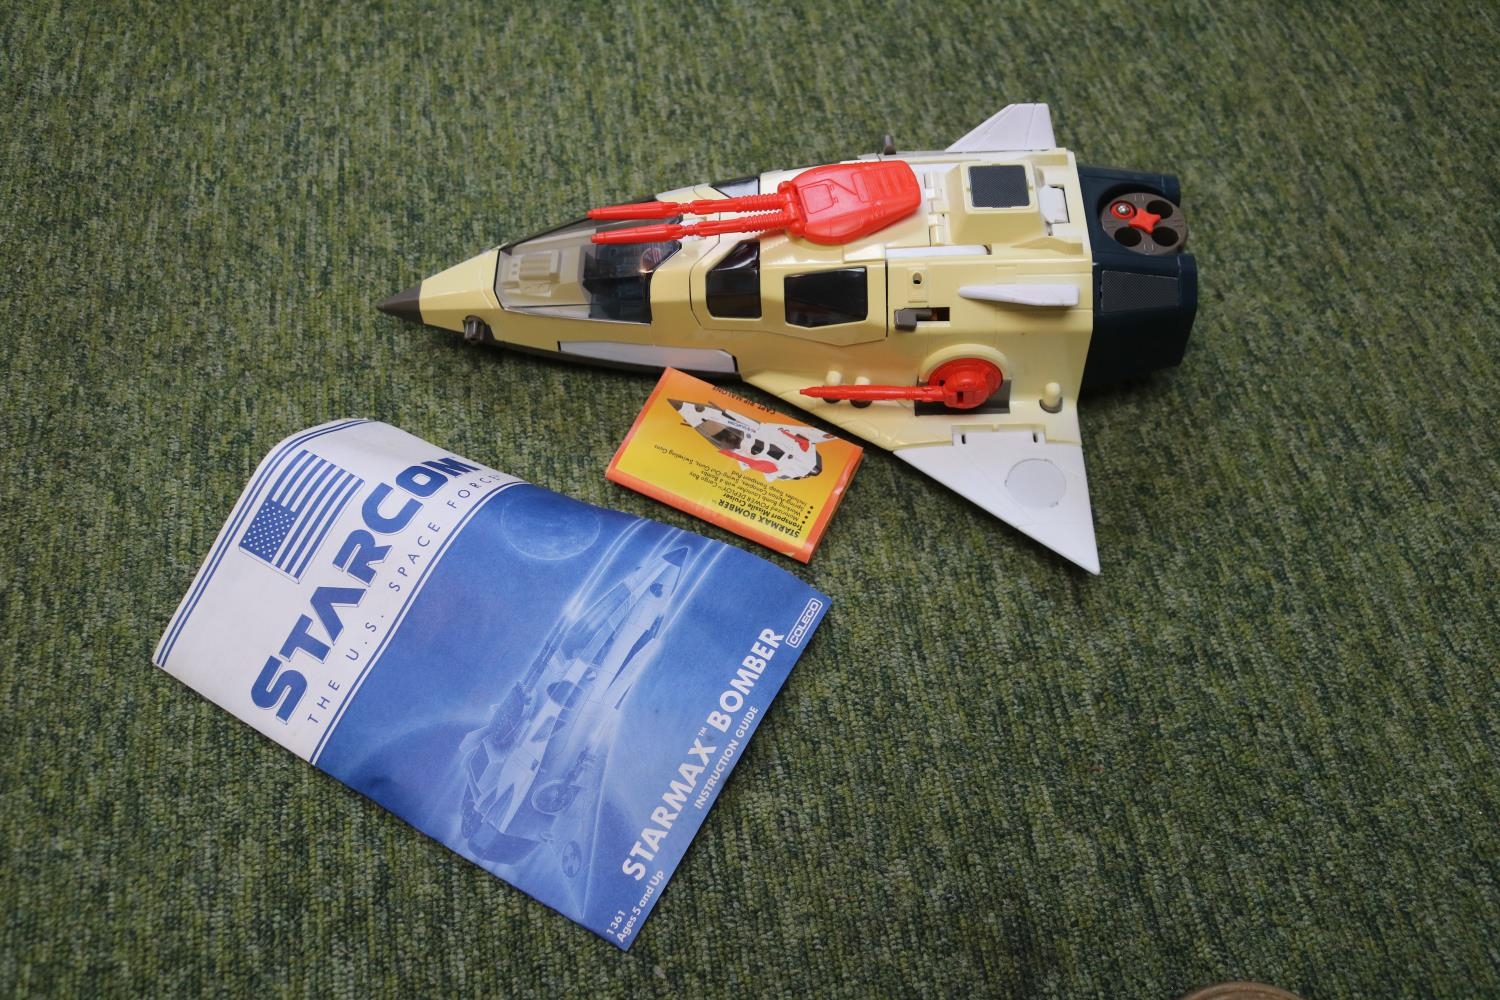 Boxed Star Wars Return of the Jedi Battle at Sarlacc's Pit Game and Boxed Starcom Starmax Bomber - Image 2 of 3